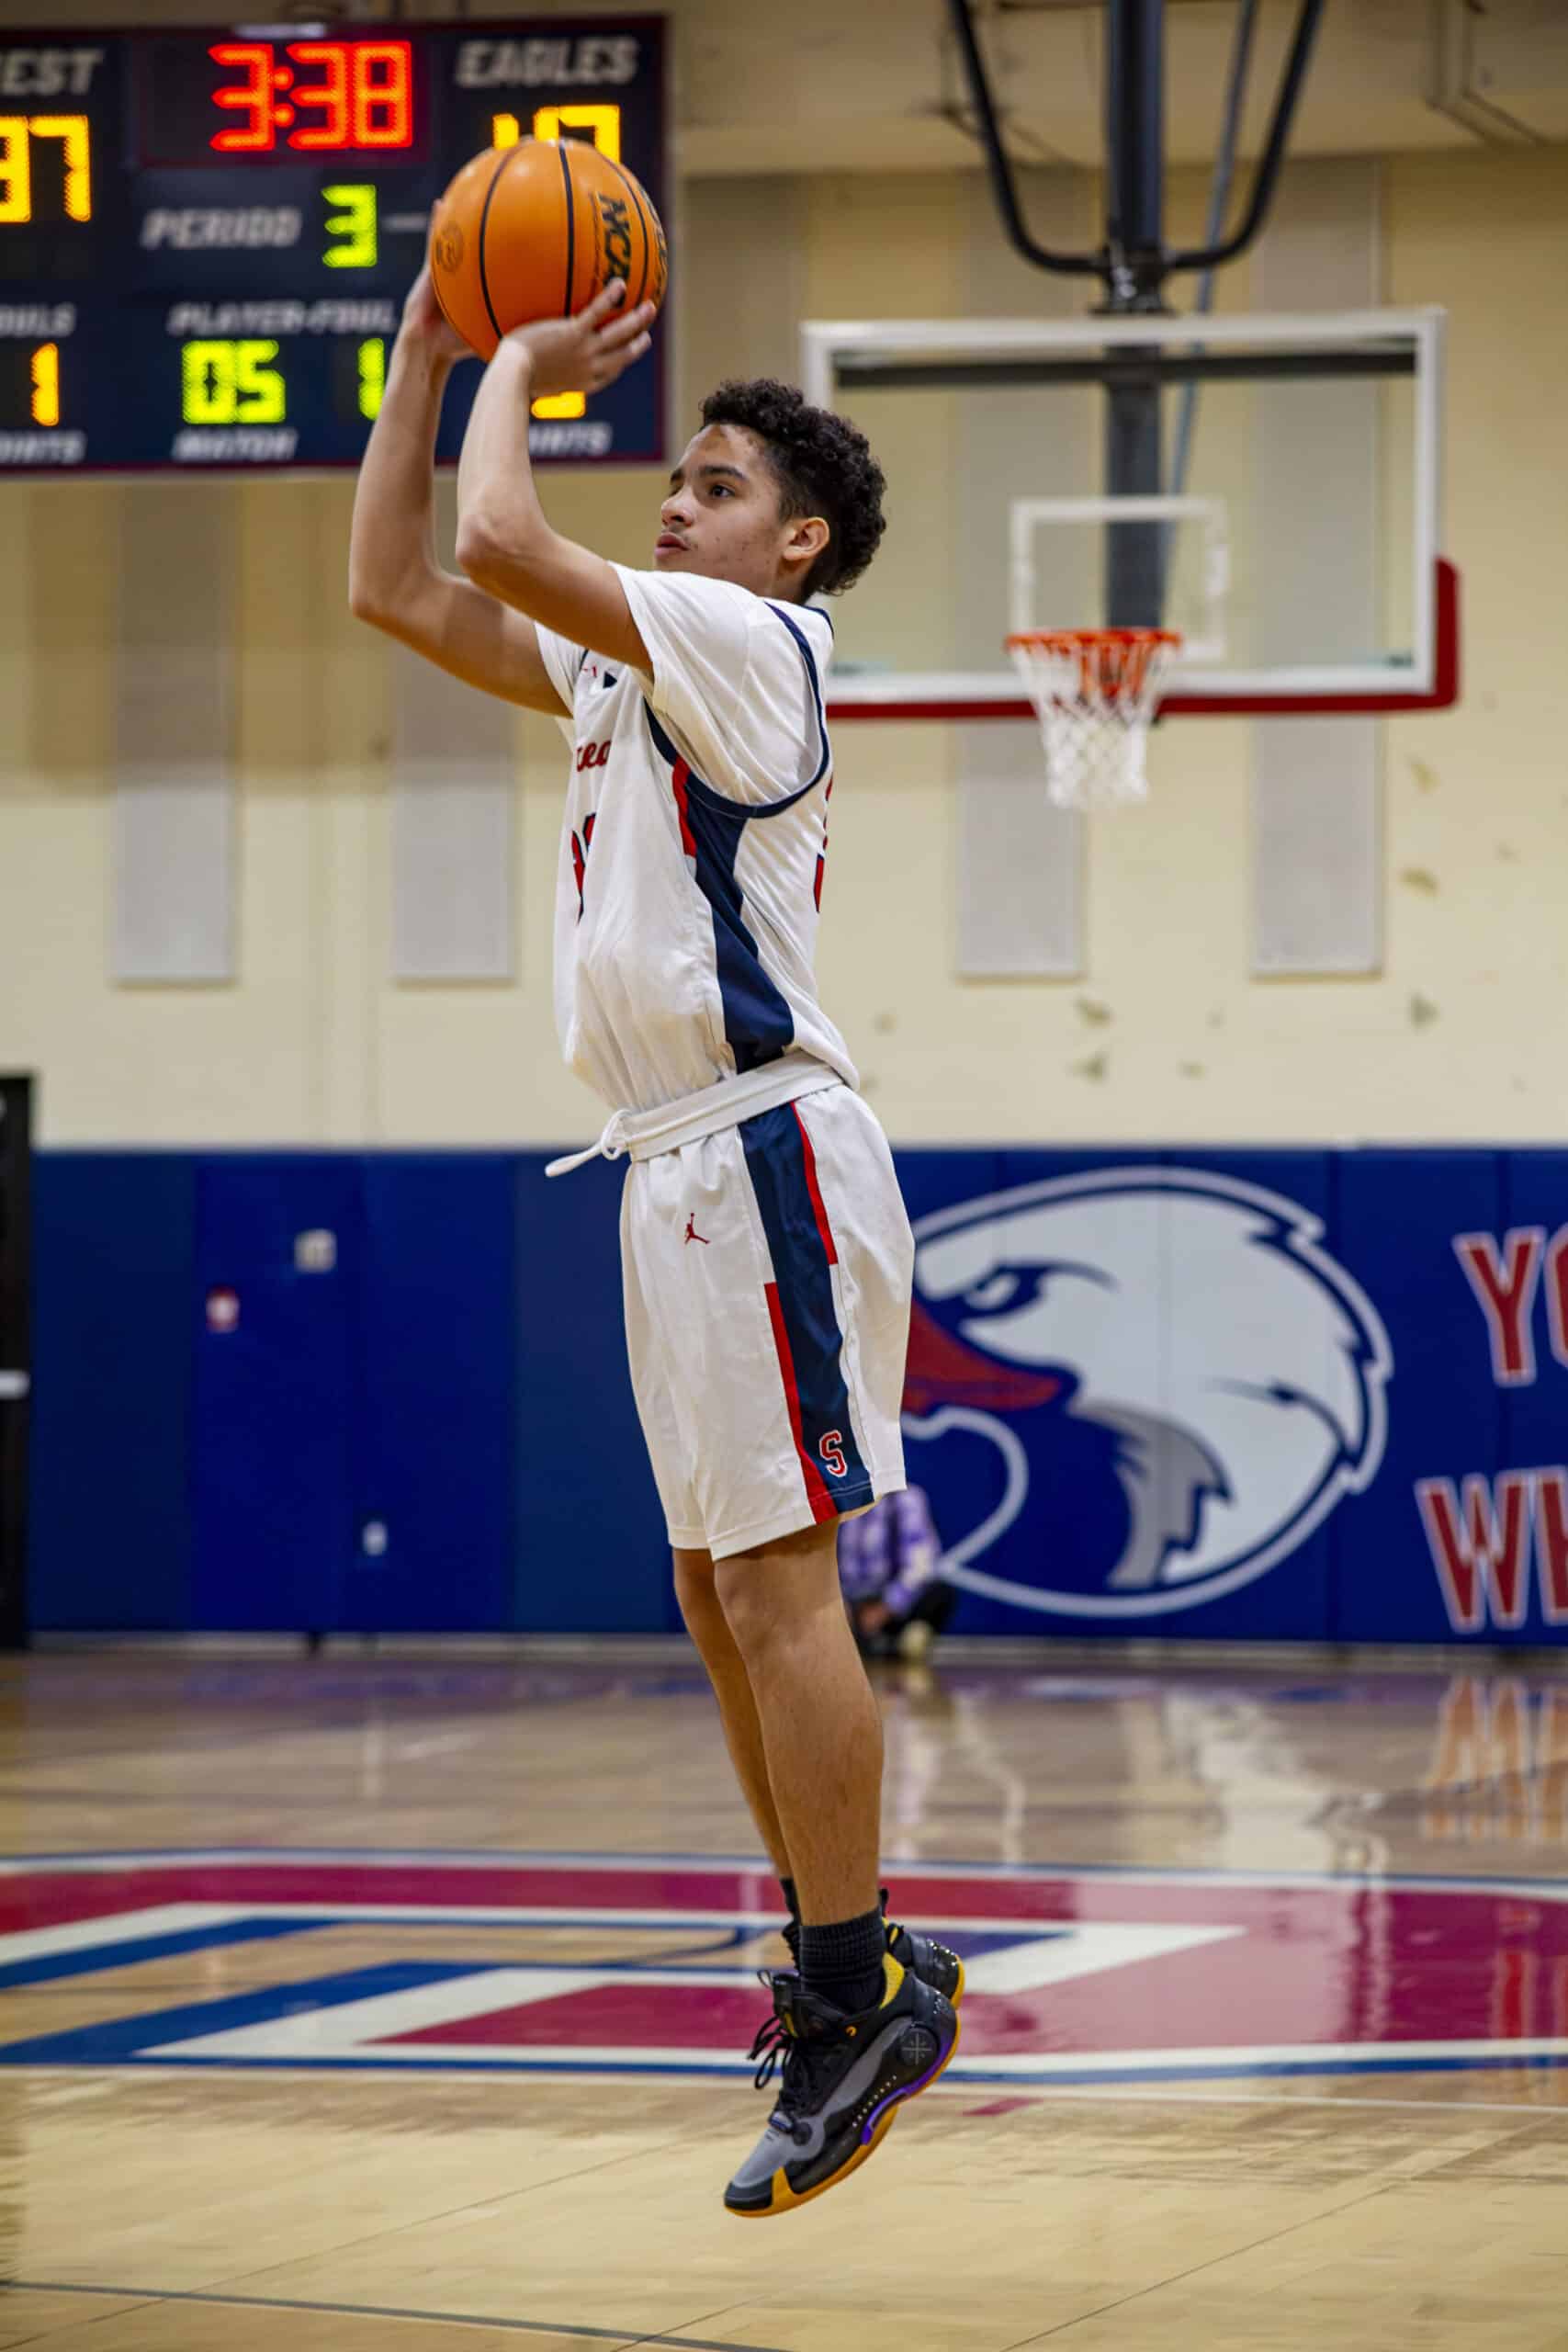 Springstead's Sam Franco going for a three-pointer. Photo by Hanna Maglio.